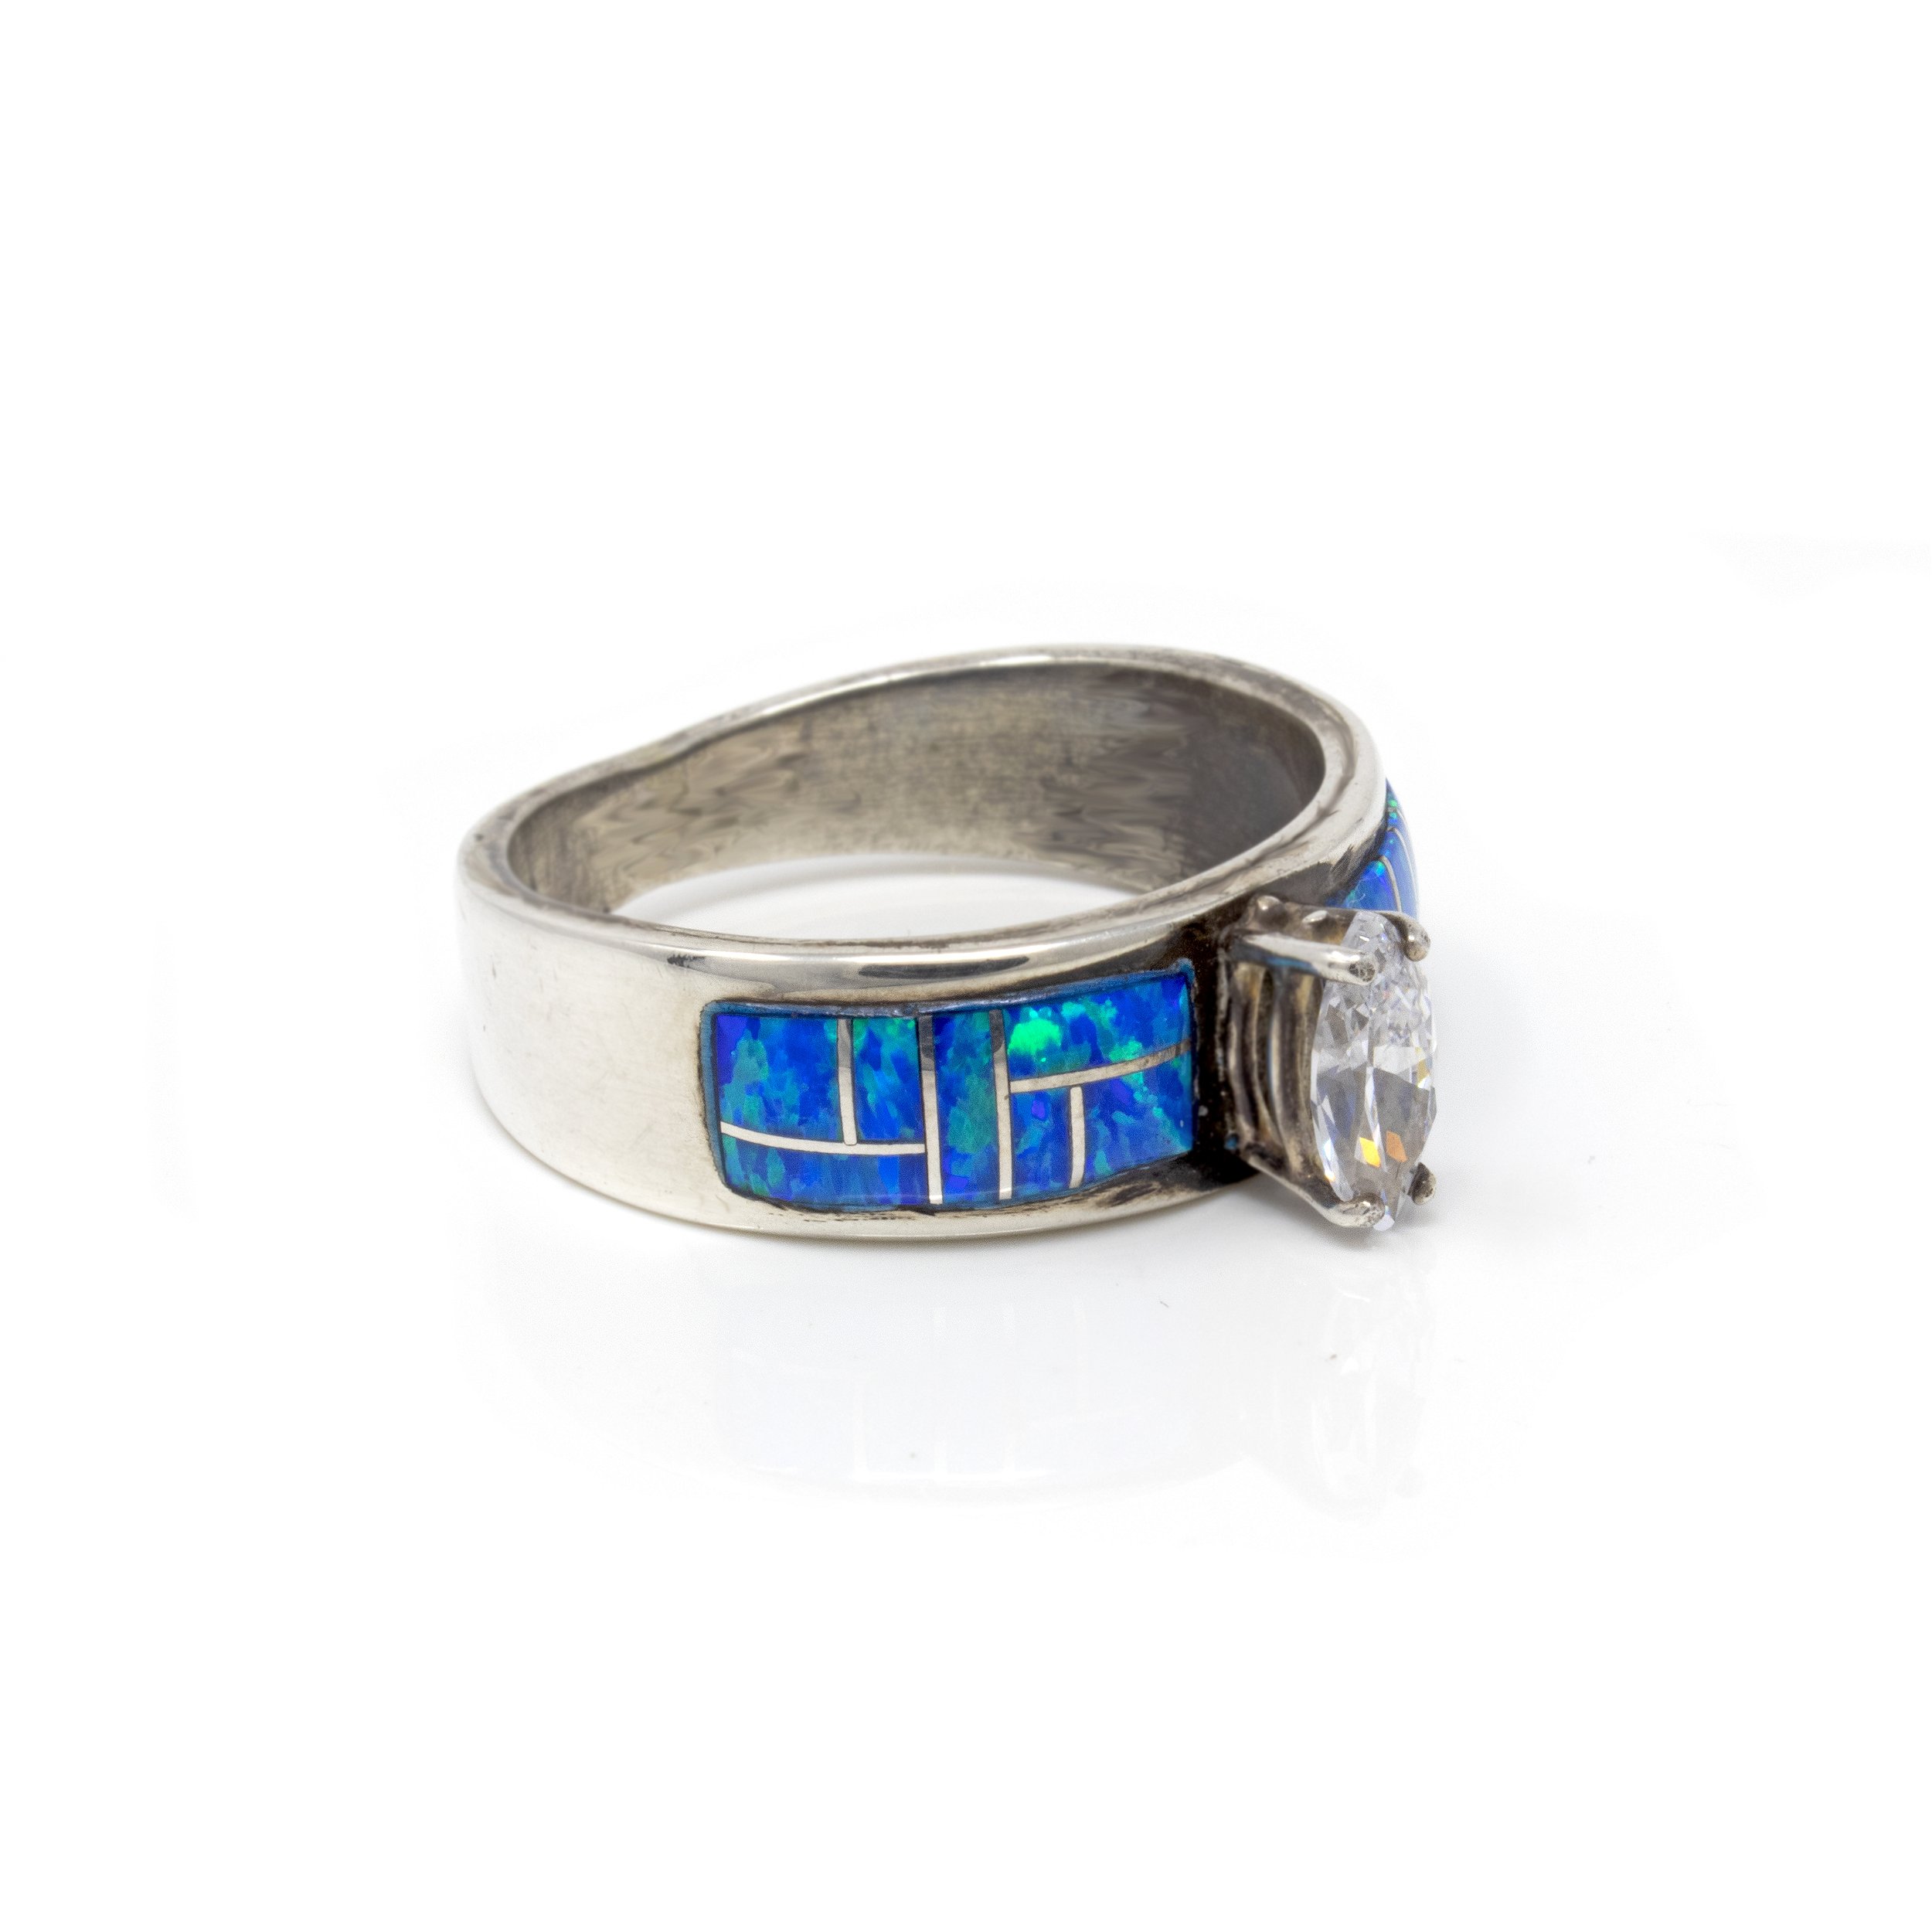 Blue Opal Ring Size 6 - Band Top Rectangular Inlay With Silver Channeling & Prong Set Cz Crystal Marquis